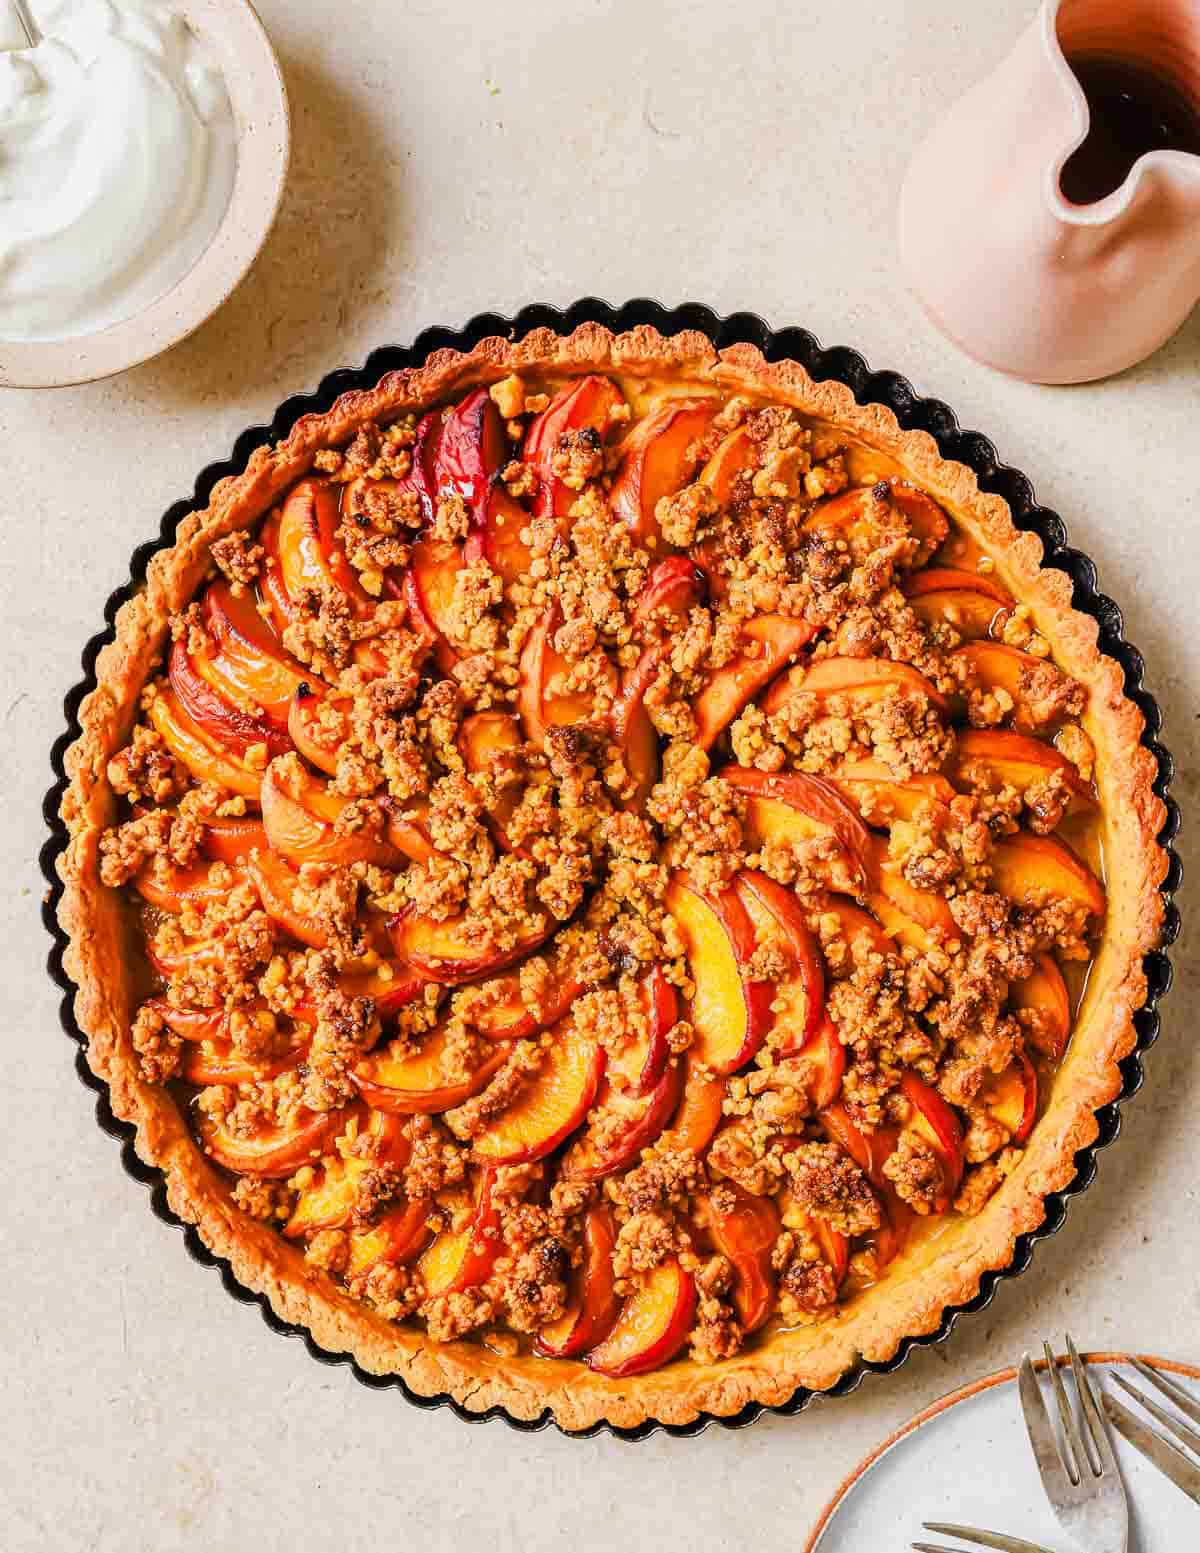 A freshly baked peach tart with sliced peaches and crumble topping, served alongside a pitcher of cream on a beige surface.